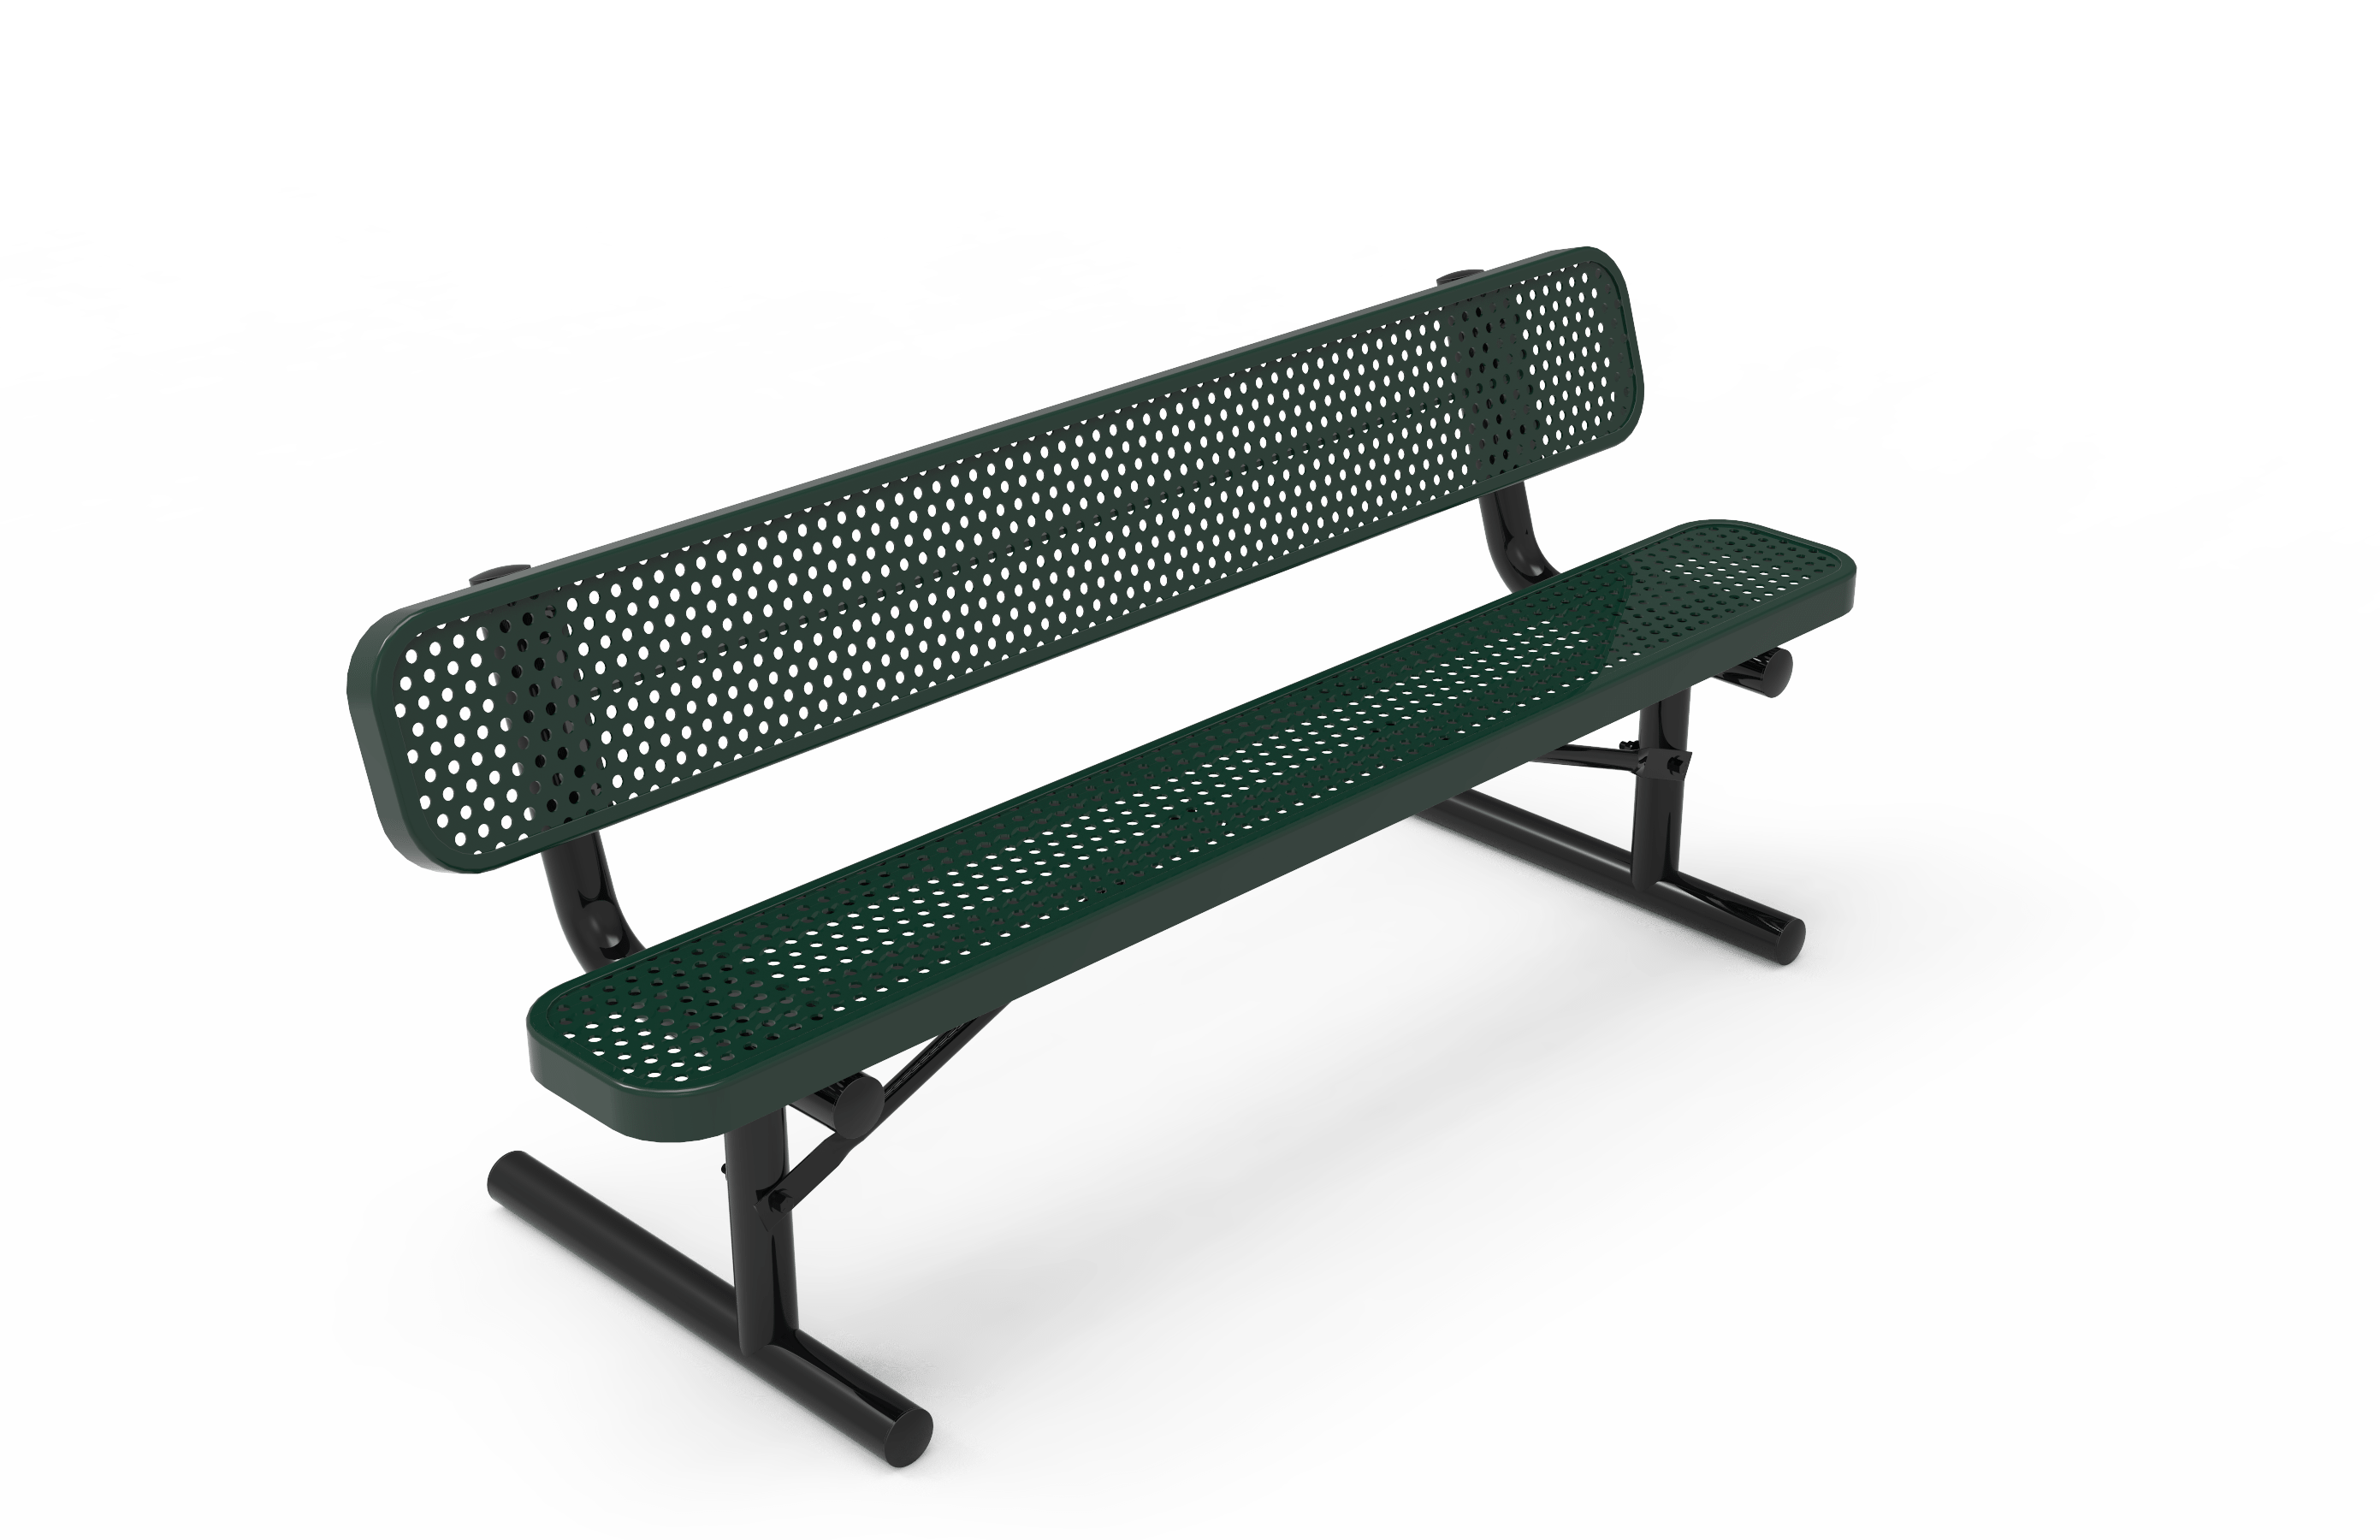 4′ Standard Bench With Back-Punched
BRT04-D-18-000
Industry Standard Finish
$559.00
BRT04-B-18-000
Advantage Premium Finish
$719.00
